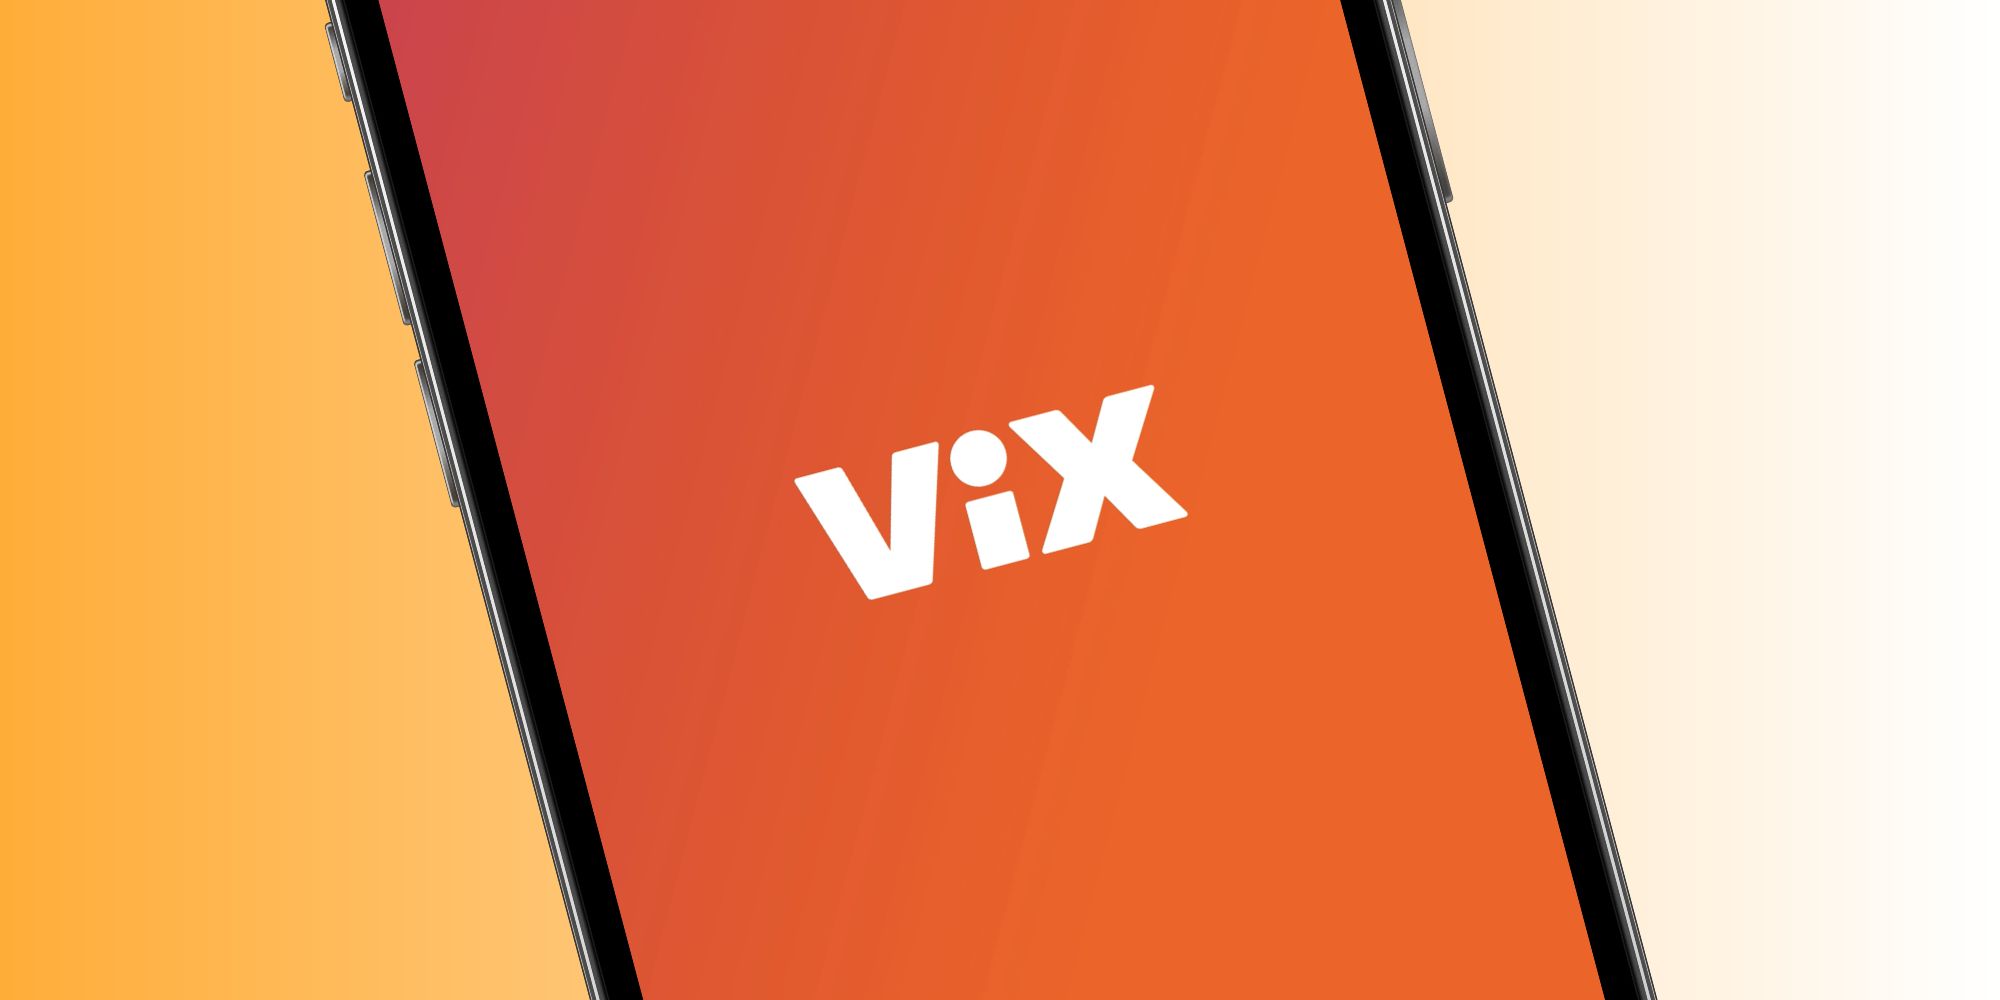 Vix App Everything You Need To Know About The Streaming Service